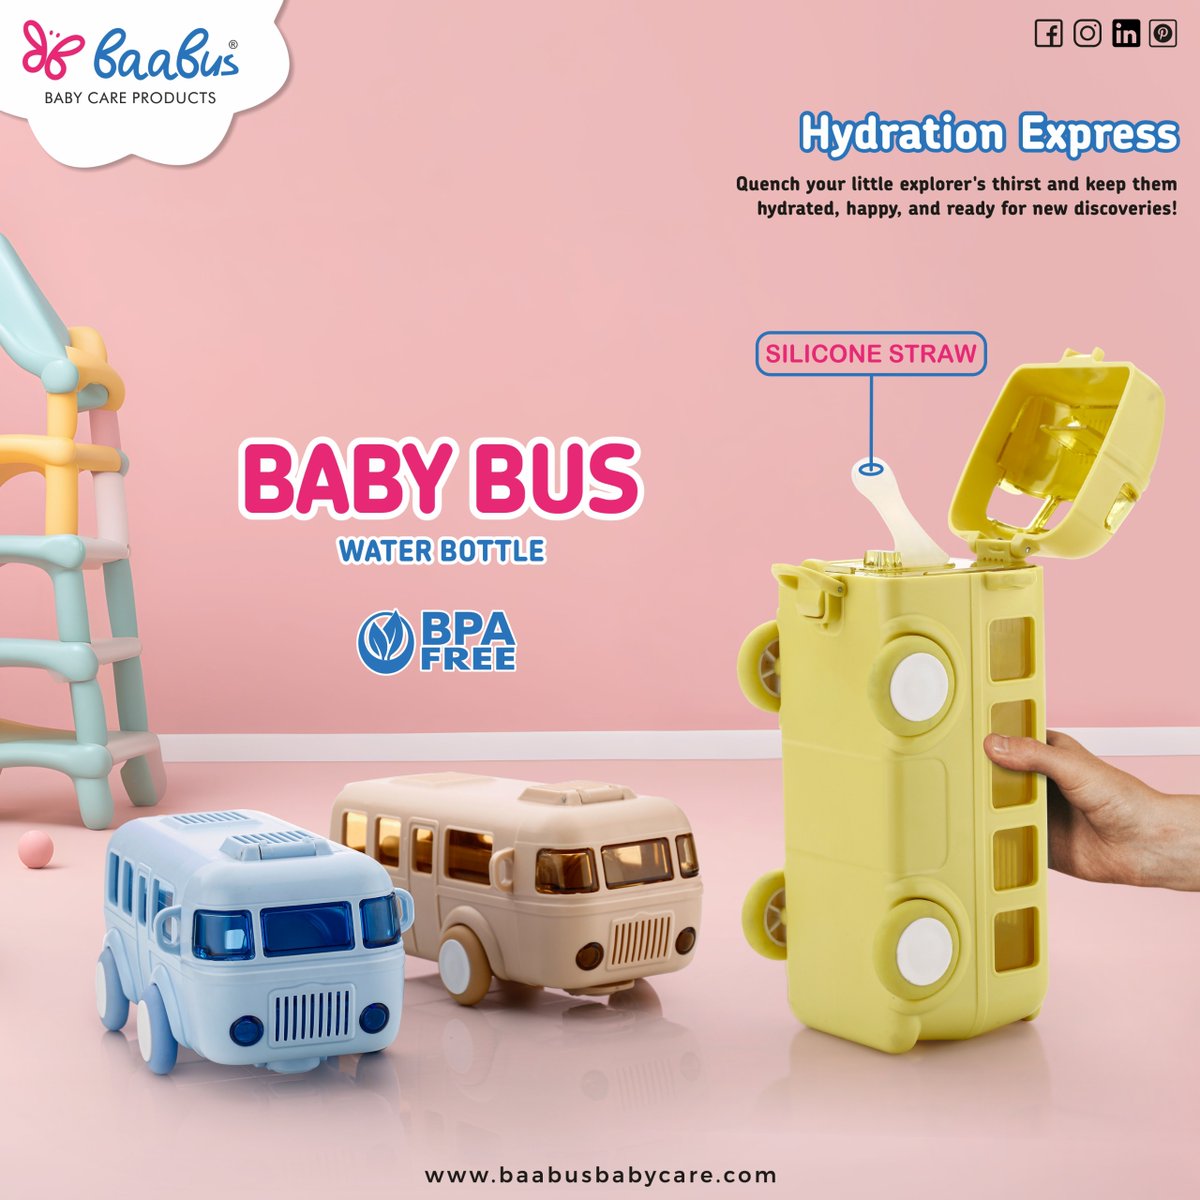 𝐇𝐲𝐝𝐫𝐚𝐭𝐢𝐨𝐧 𝐄𝐱𝐩𝐫𝐞𝐬𝐬
Quench your little explorer's thirst and keep them hydrated, happy, and ready for new discoveries!

𝐁𝐚𝐚𝐁𝐮𝐬
BABY CARE PRODUCTS

#BabyBus #WaterBottle #HydrationStation #KidsHydration #ToddlerLife #OnTheGo #ParentingEssentials #StayHydrated